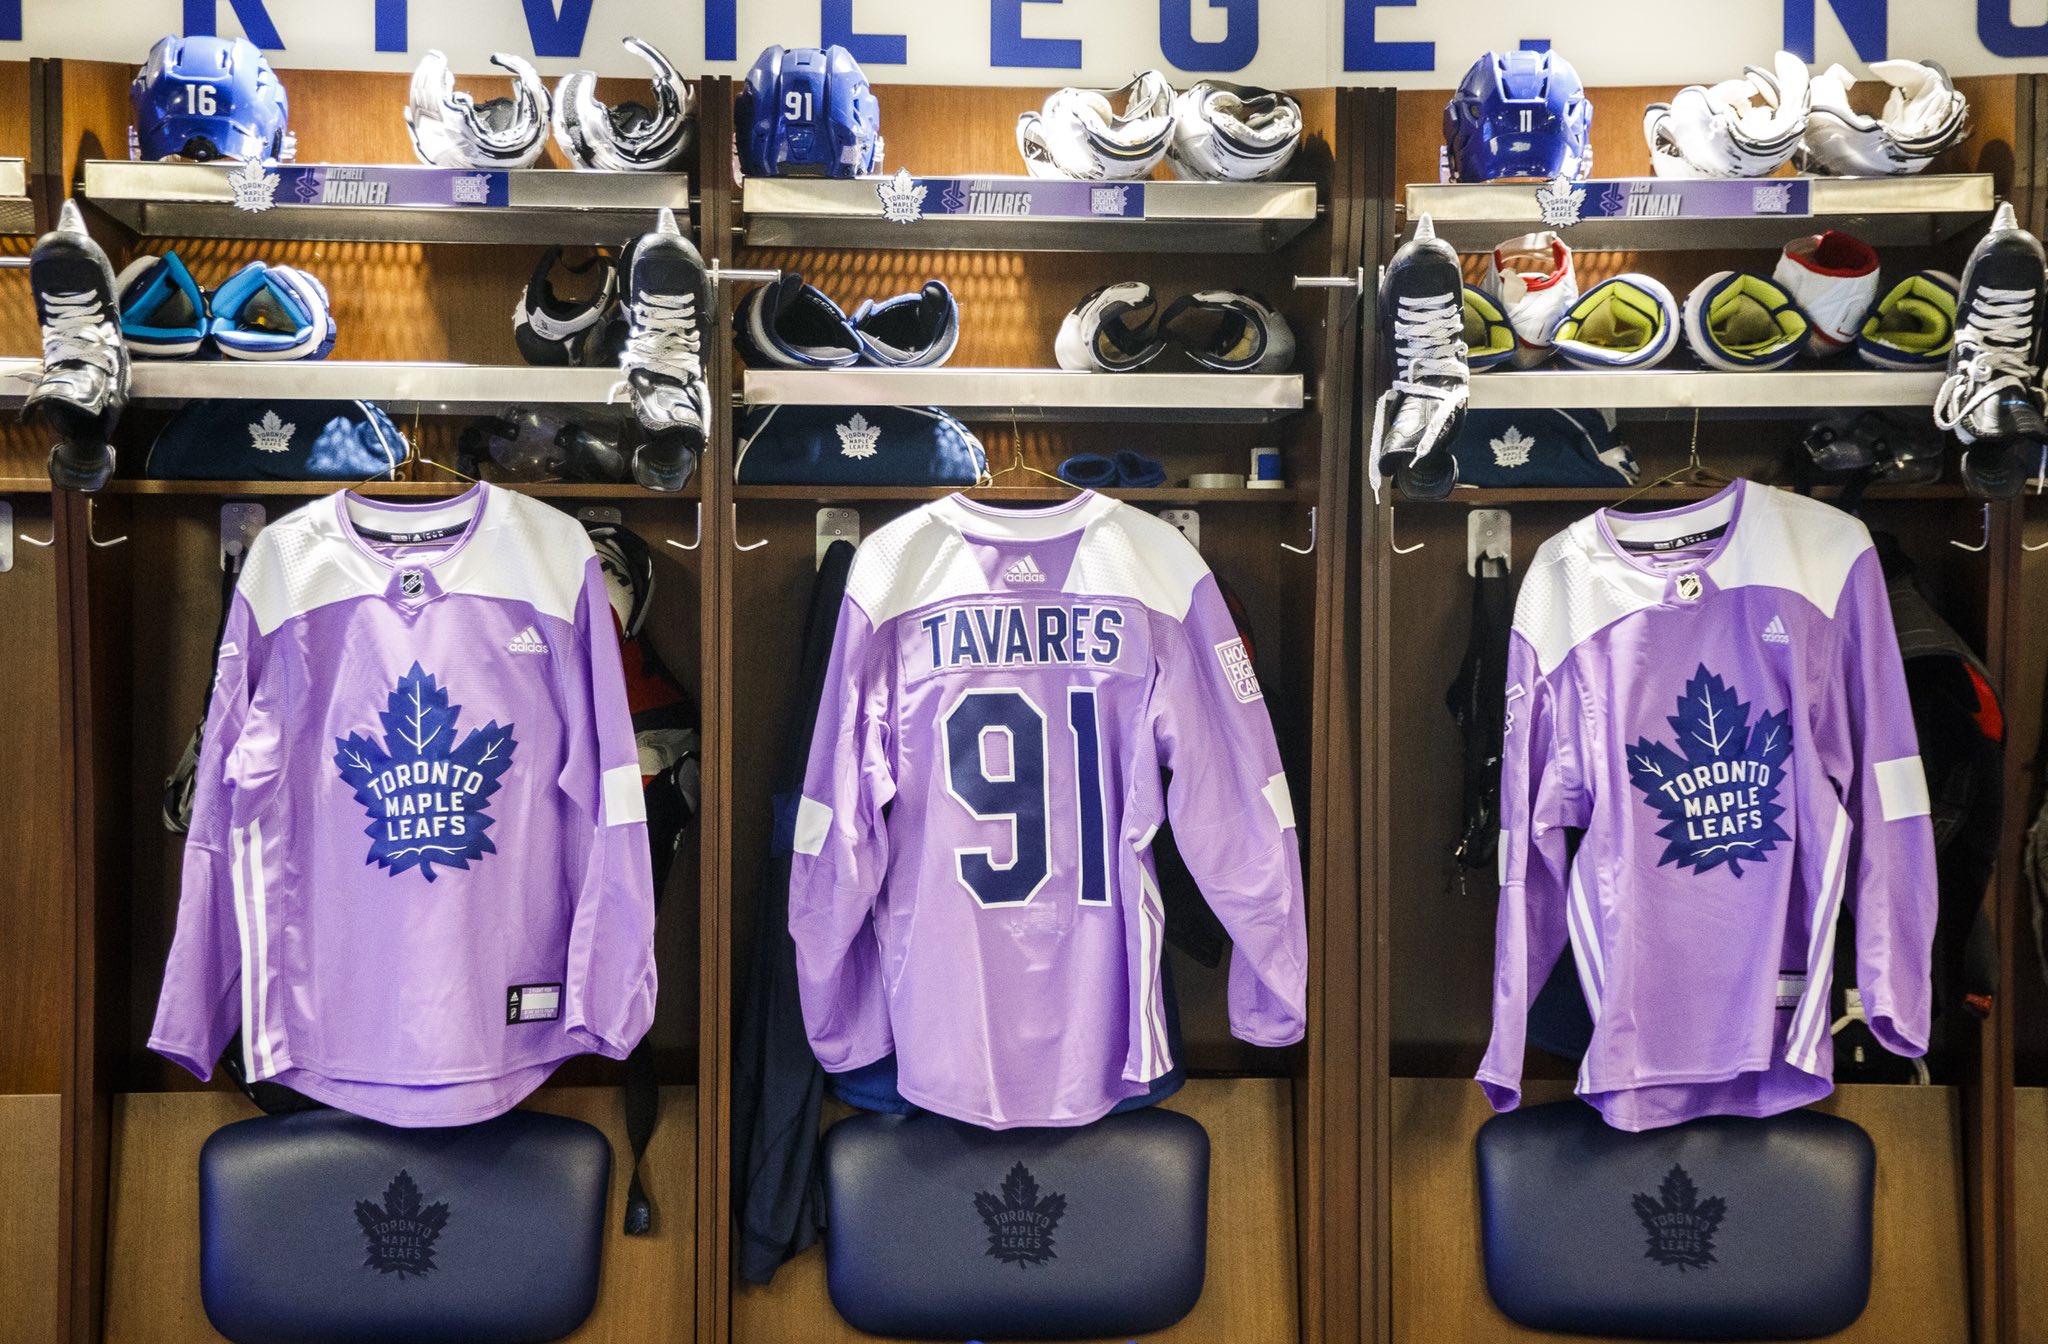 Toronto Maple Leafs - Our #HockeyFightsCancer jersey and stick auction is  live! Bid on your favourite player-worn warm-up jersey and stick with all  proceeds benefiting Camp Oochigeas & Camp Trillium 💜 #LeafsForever